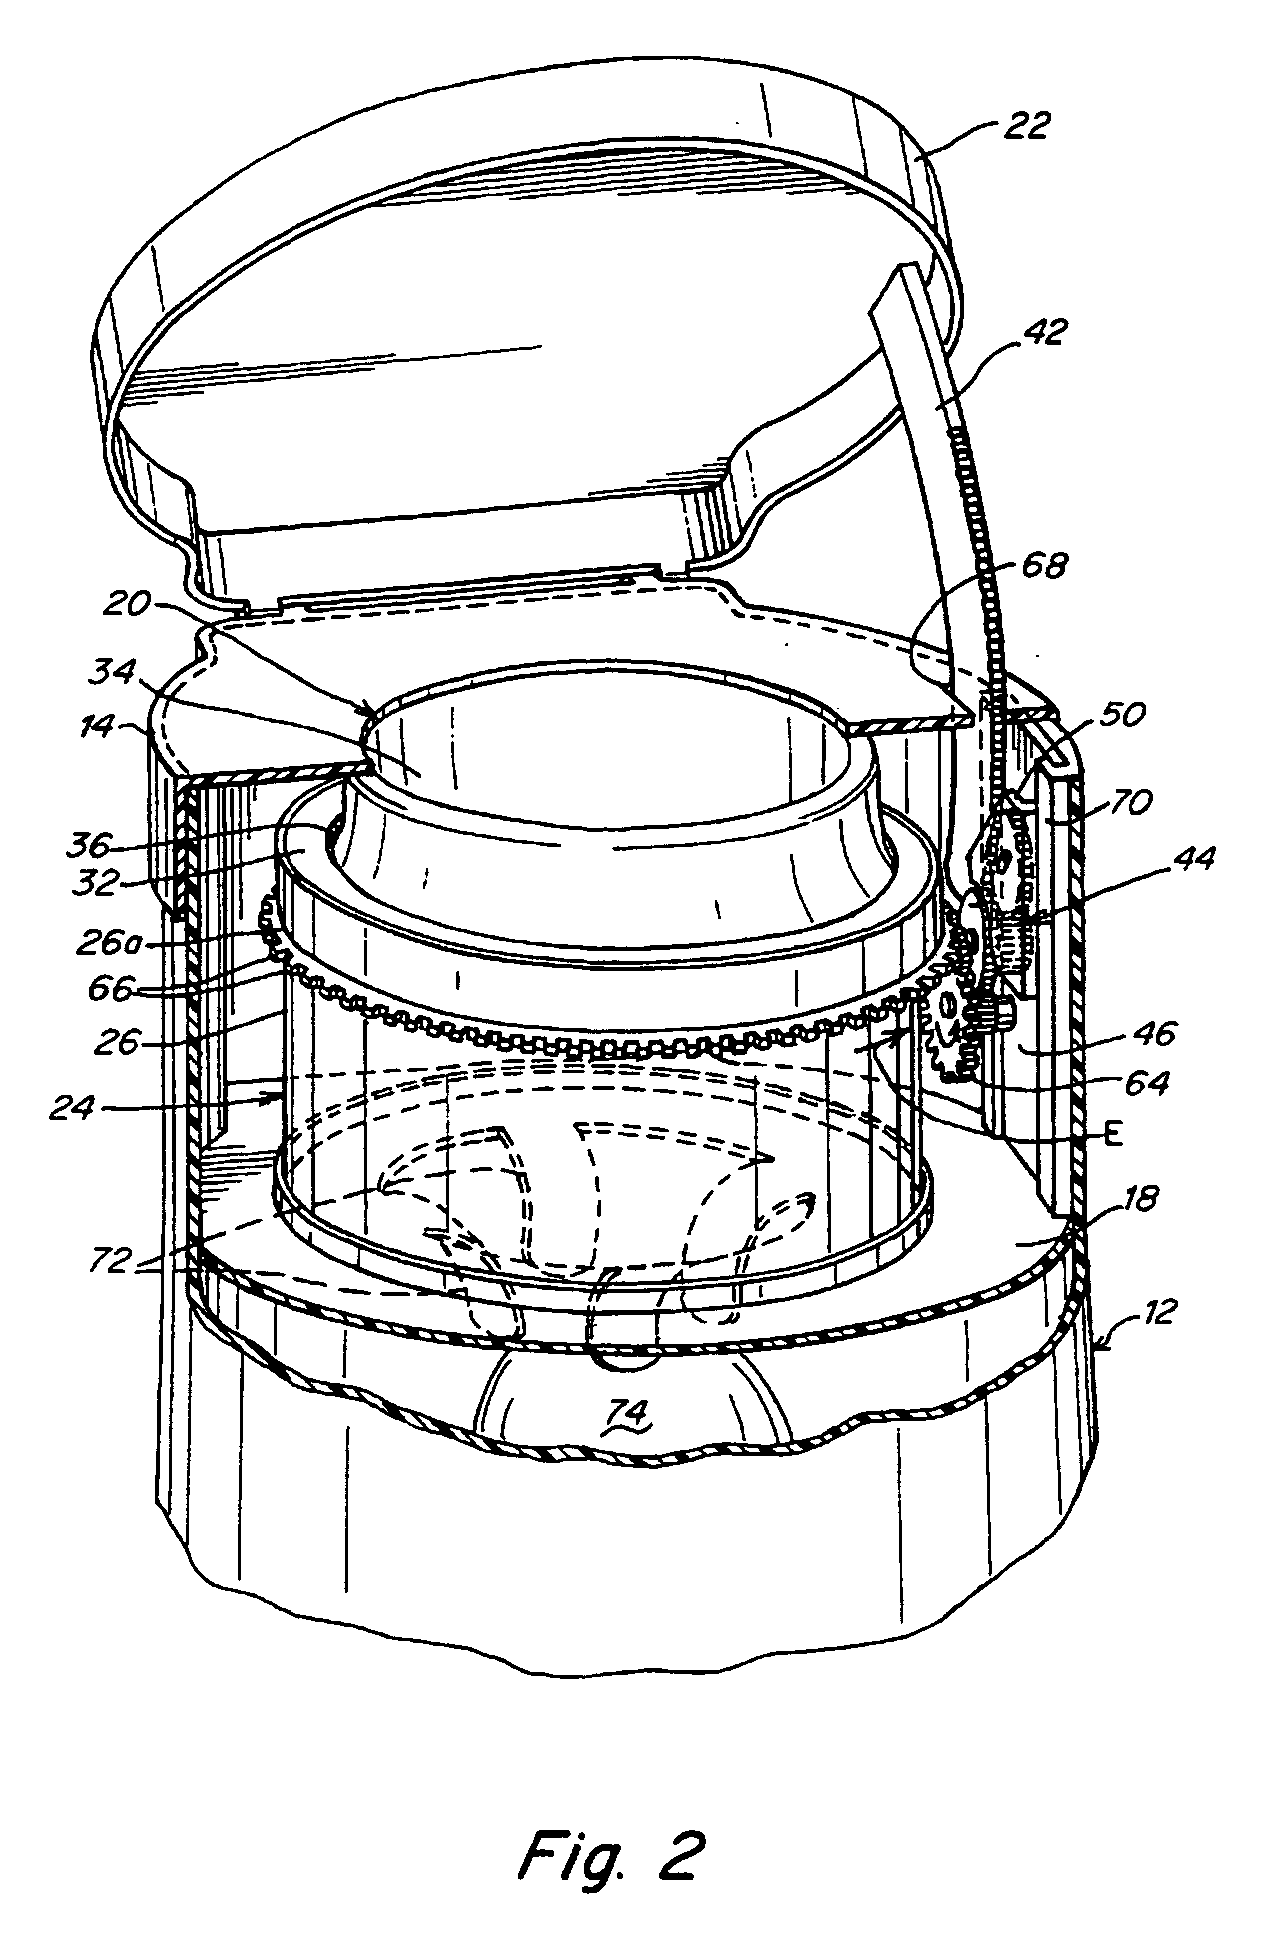 Waste disposal device including rotating cartridge coupled to hinged lid